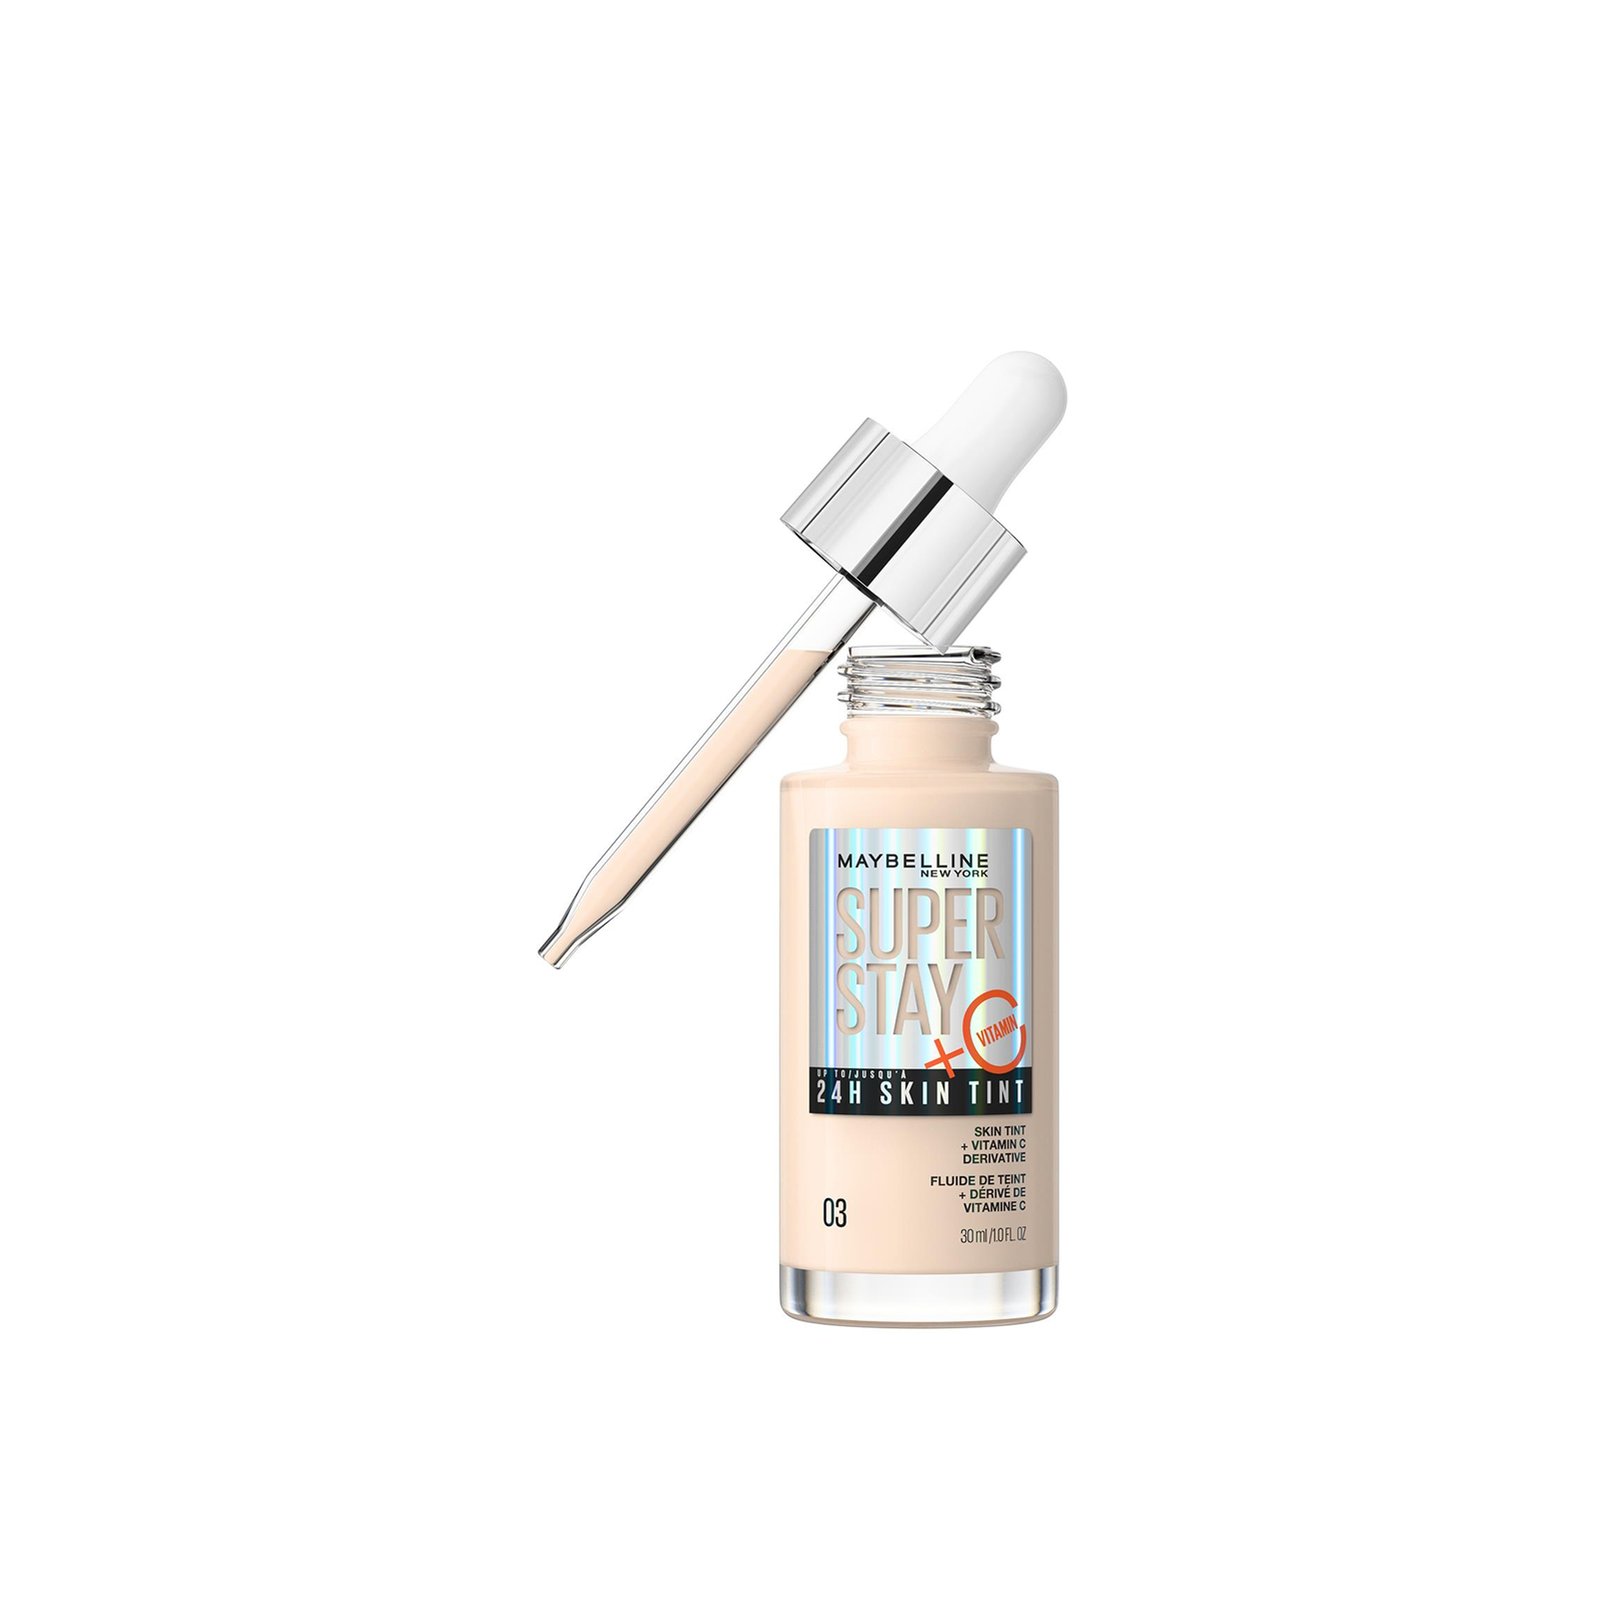 Maybelline - Superstay 24h Skin Tint 31 30 ml